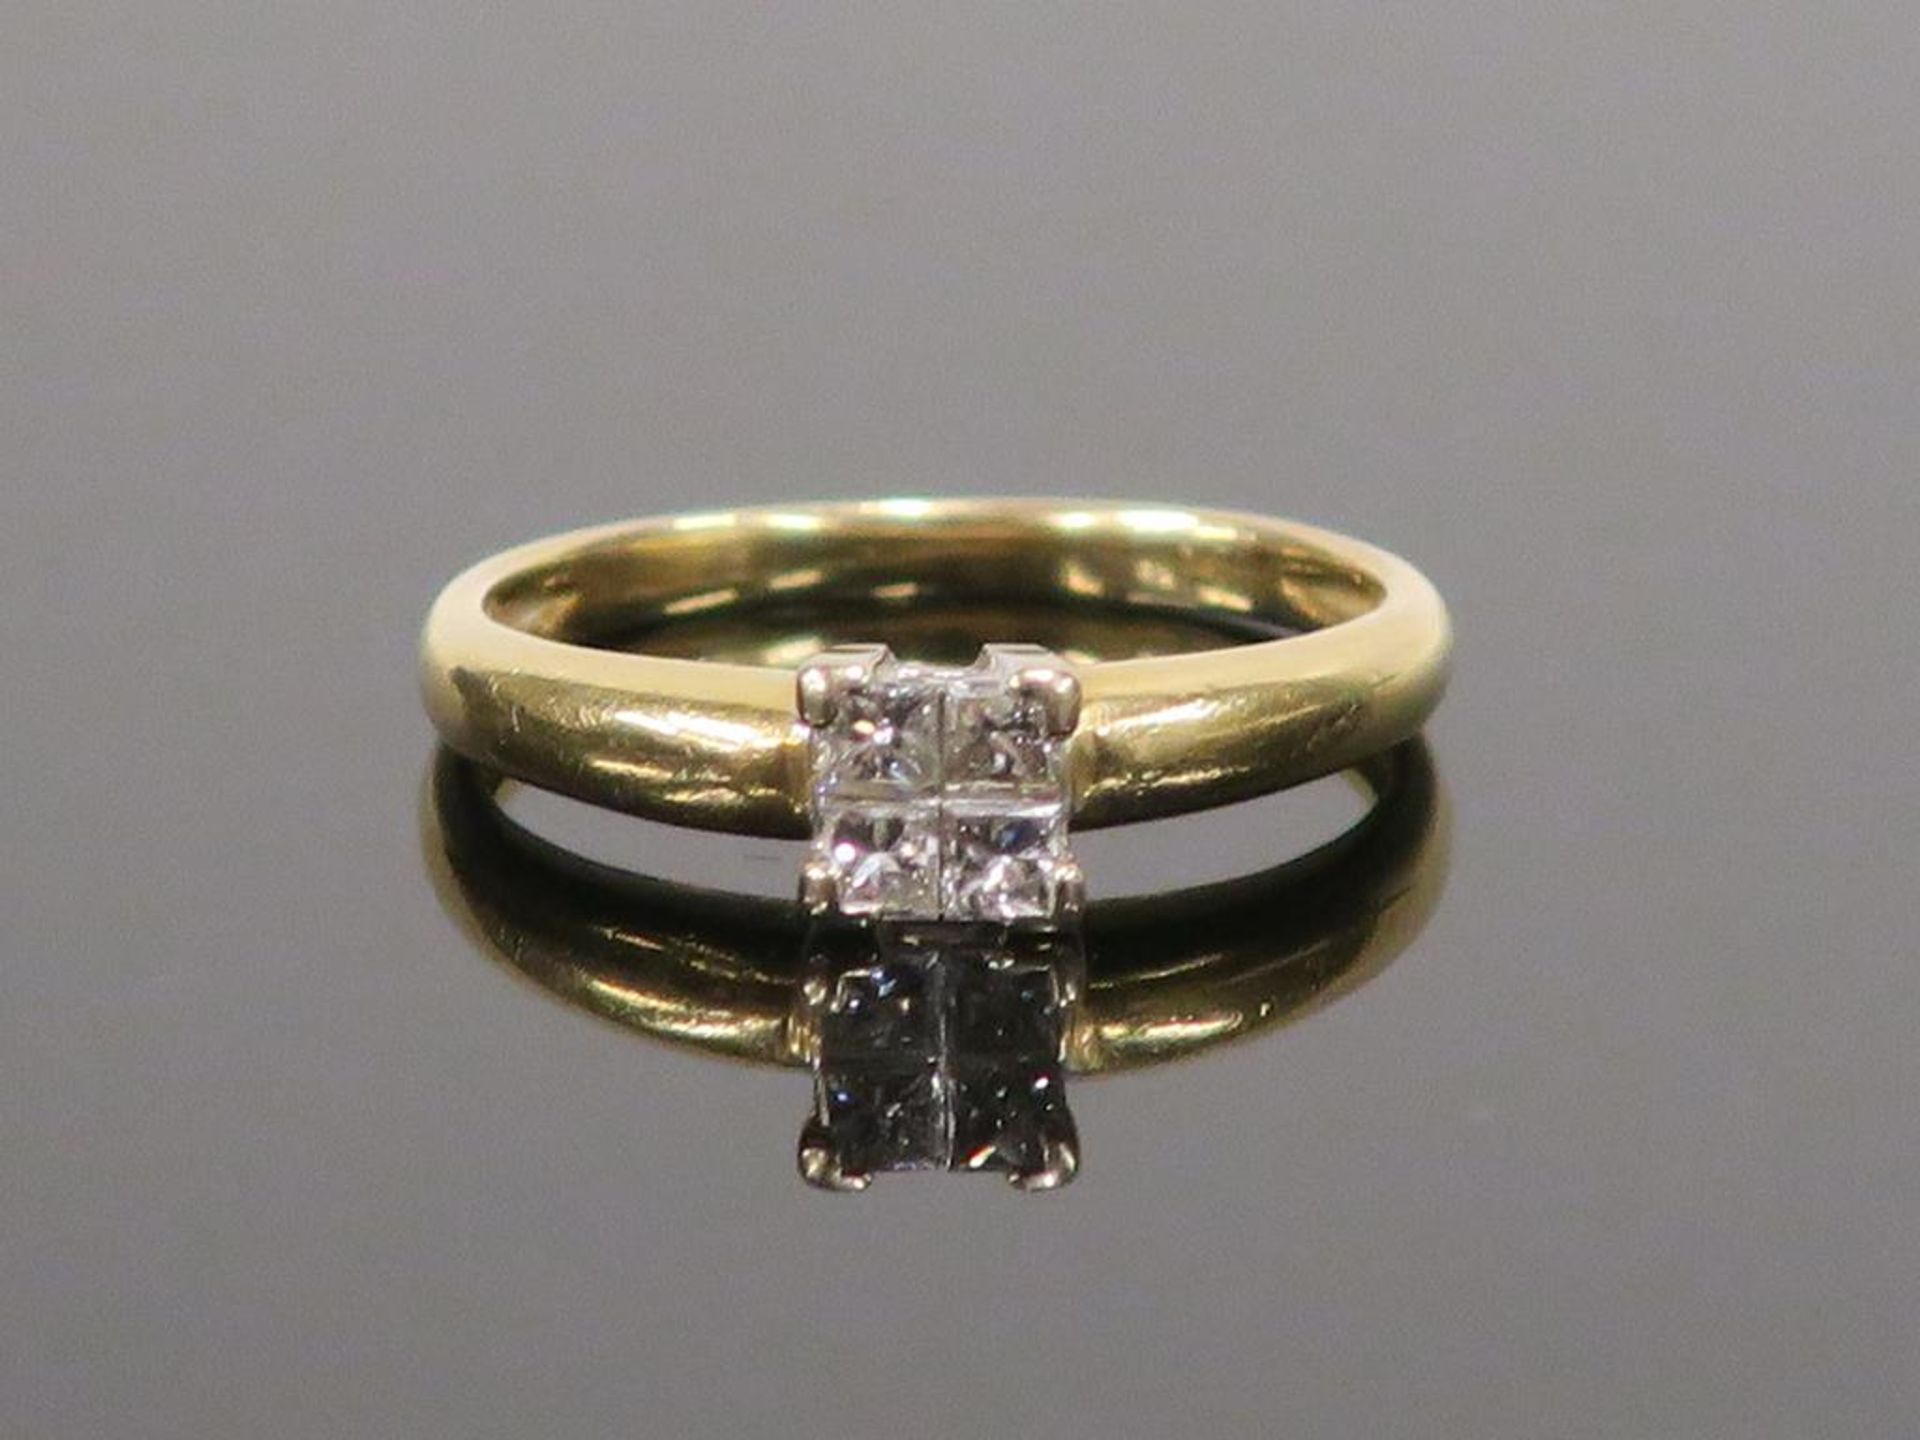 A 9ct Gold Diamond Solitaire Ring size L (weight 2.4g) (est £80-£120)